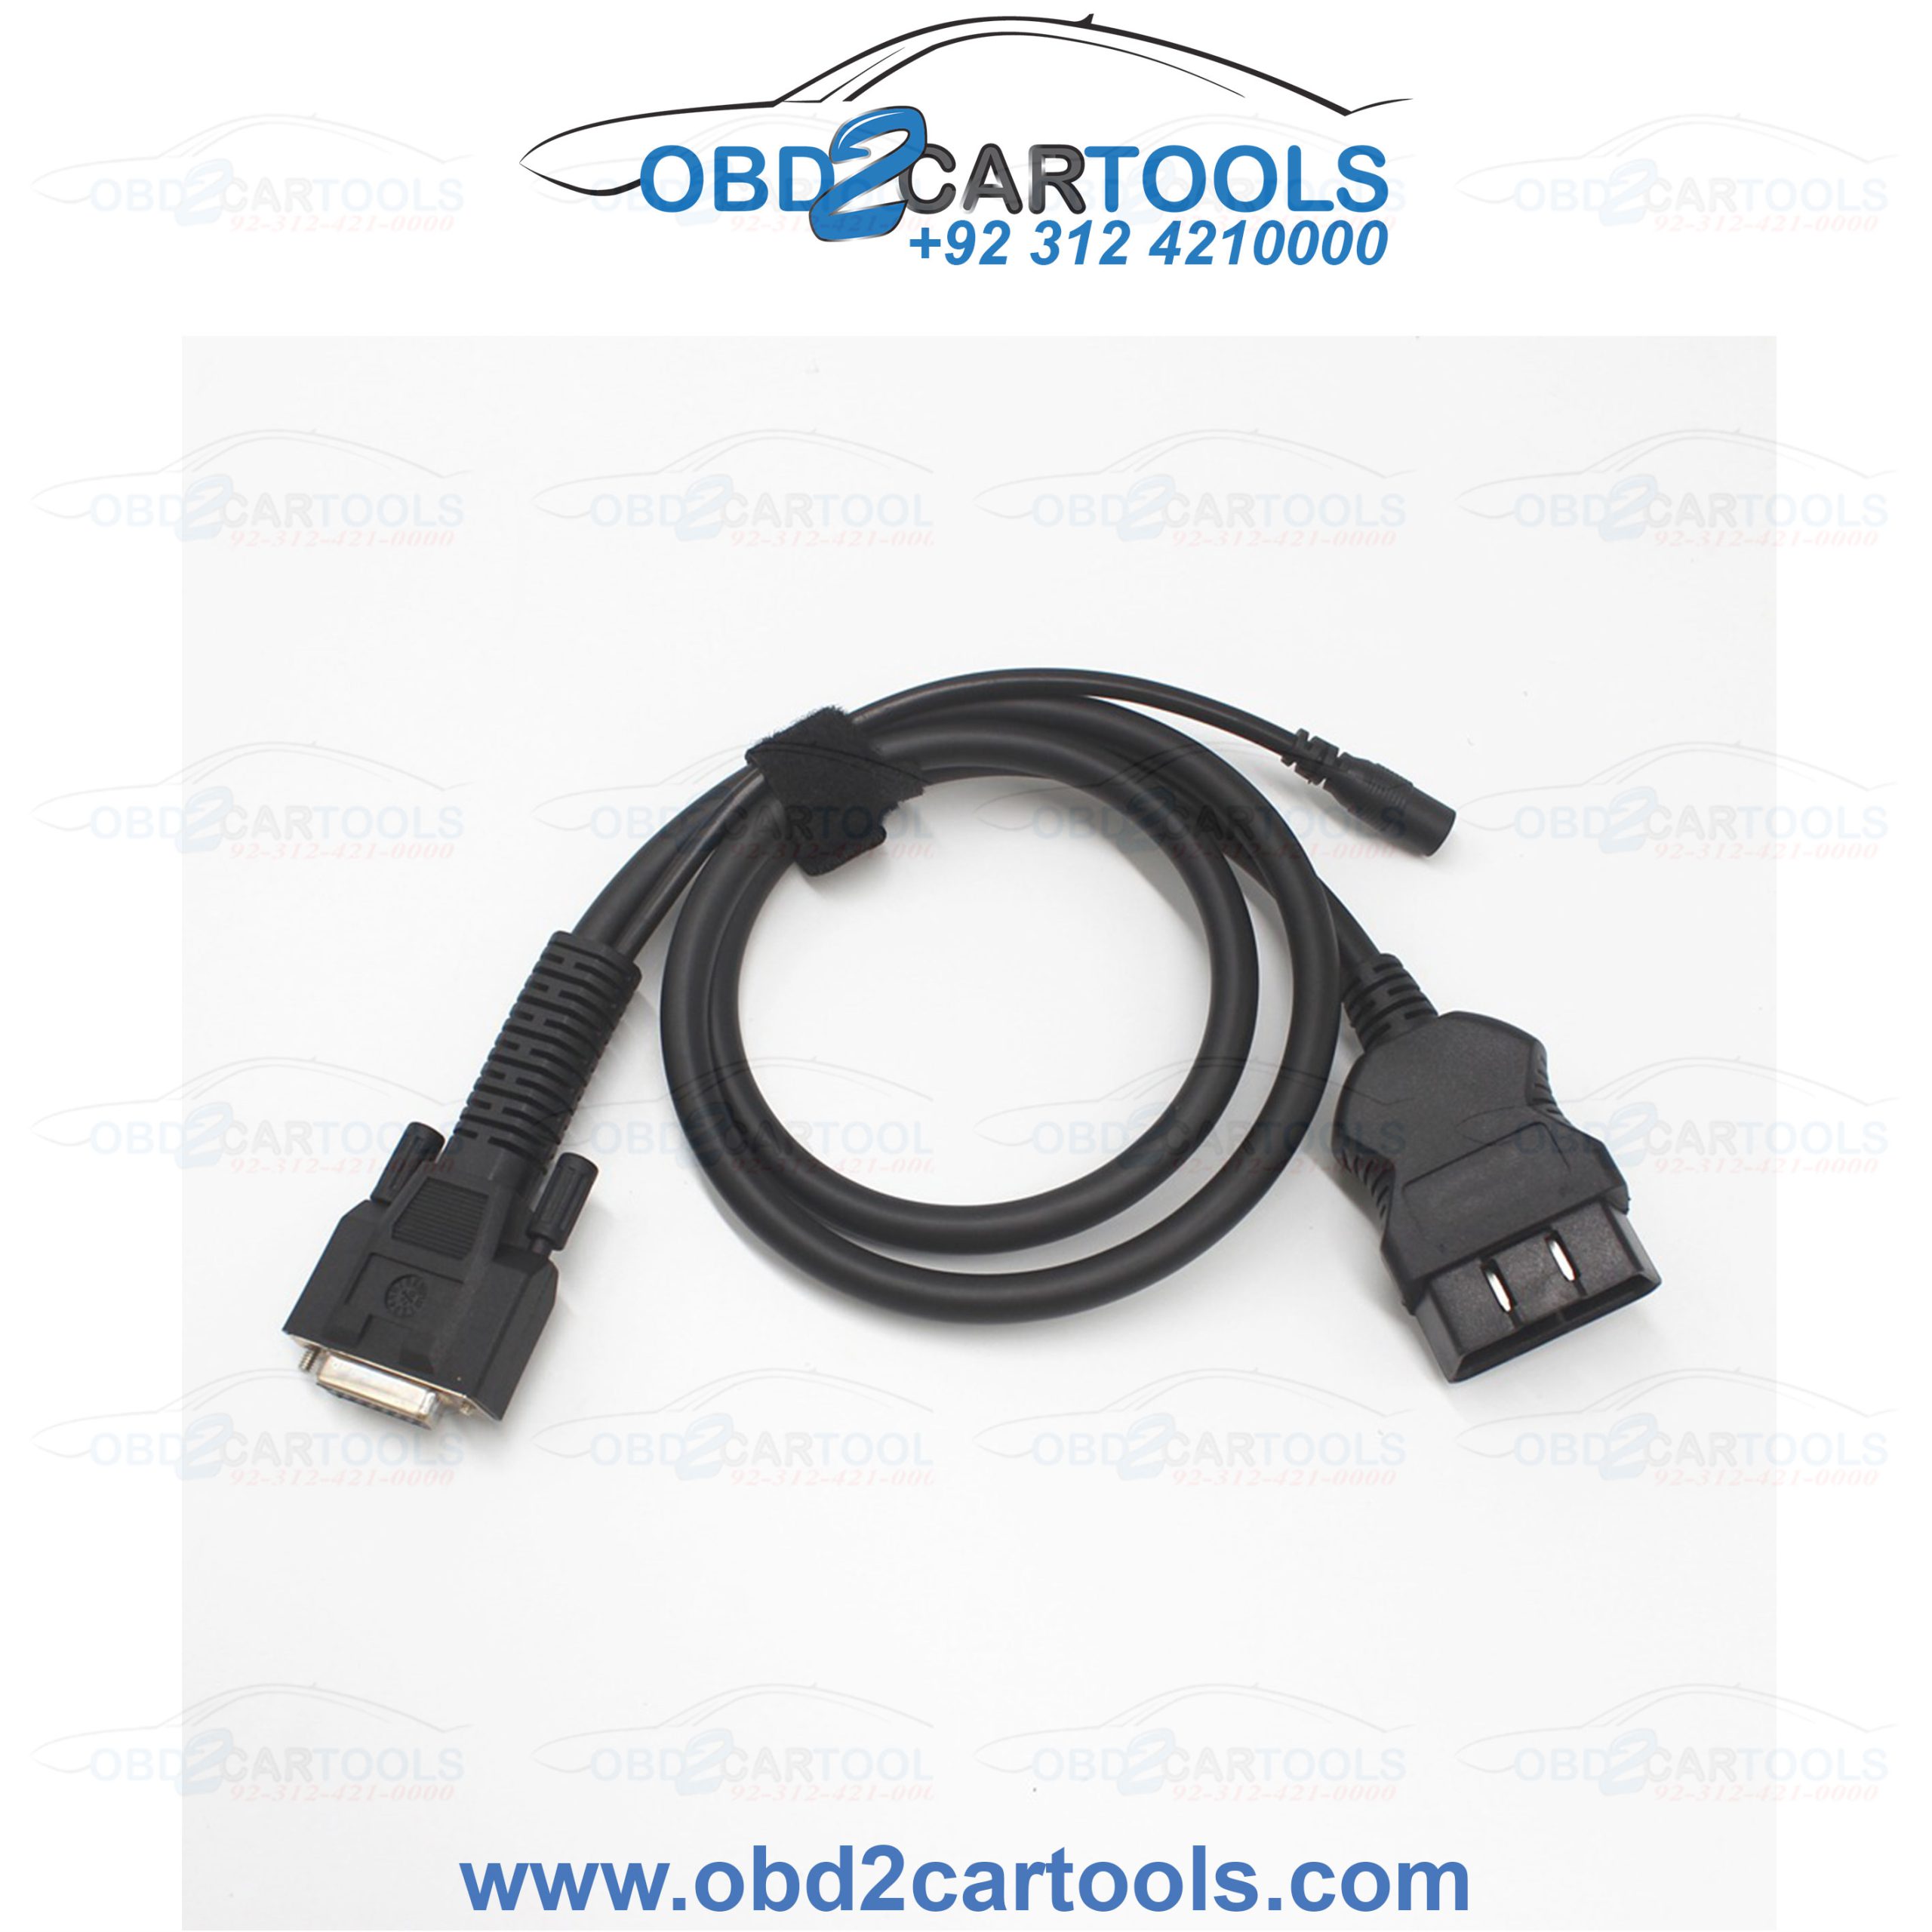 Product image for FCar C8-W main cable for main device